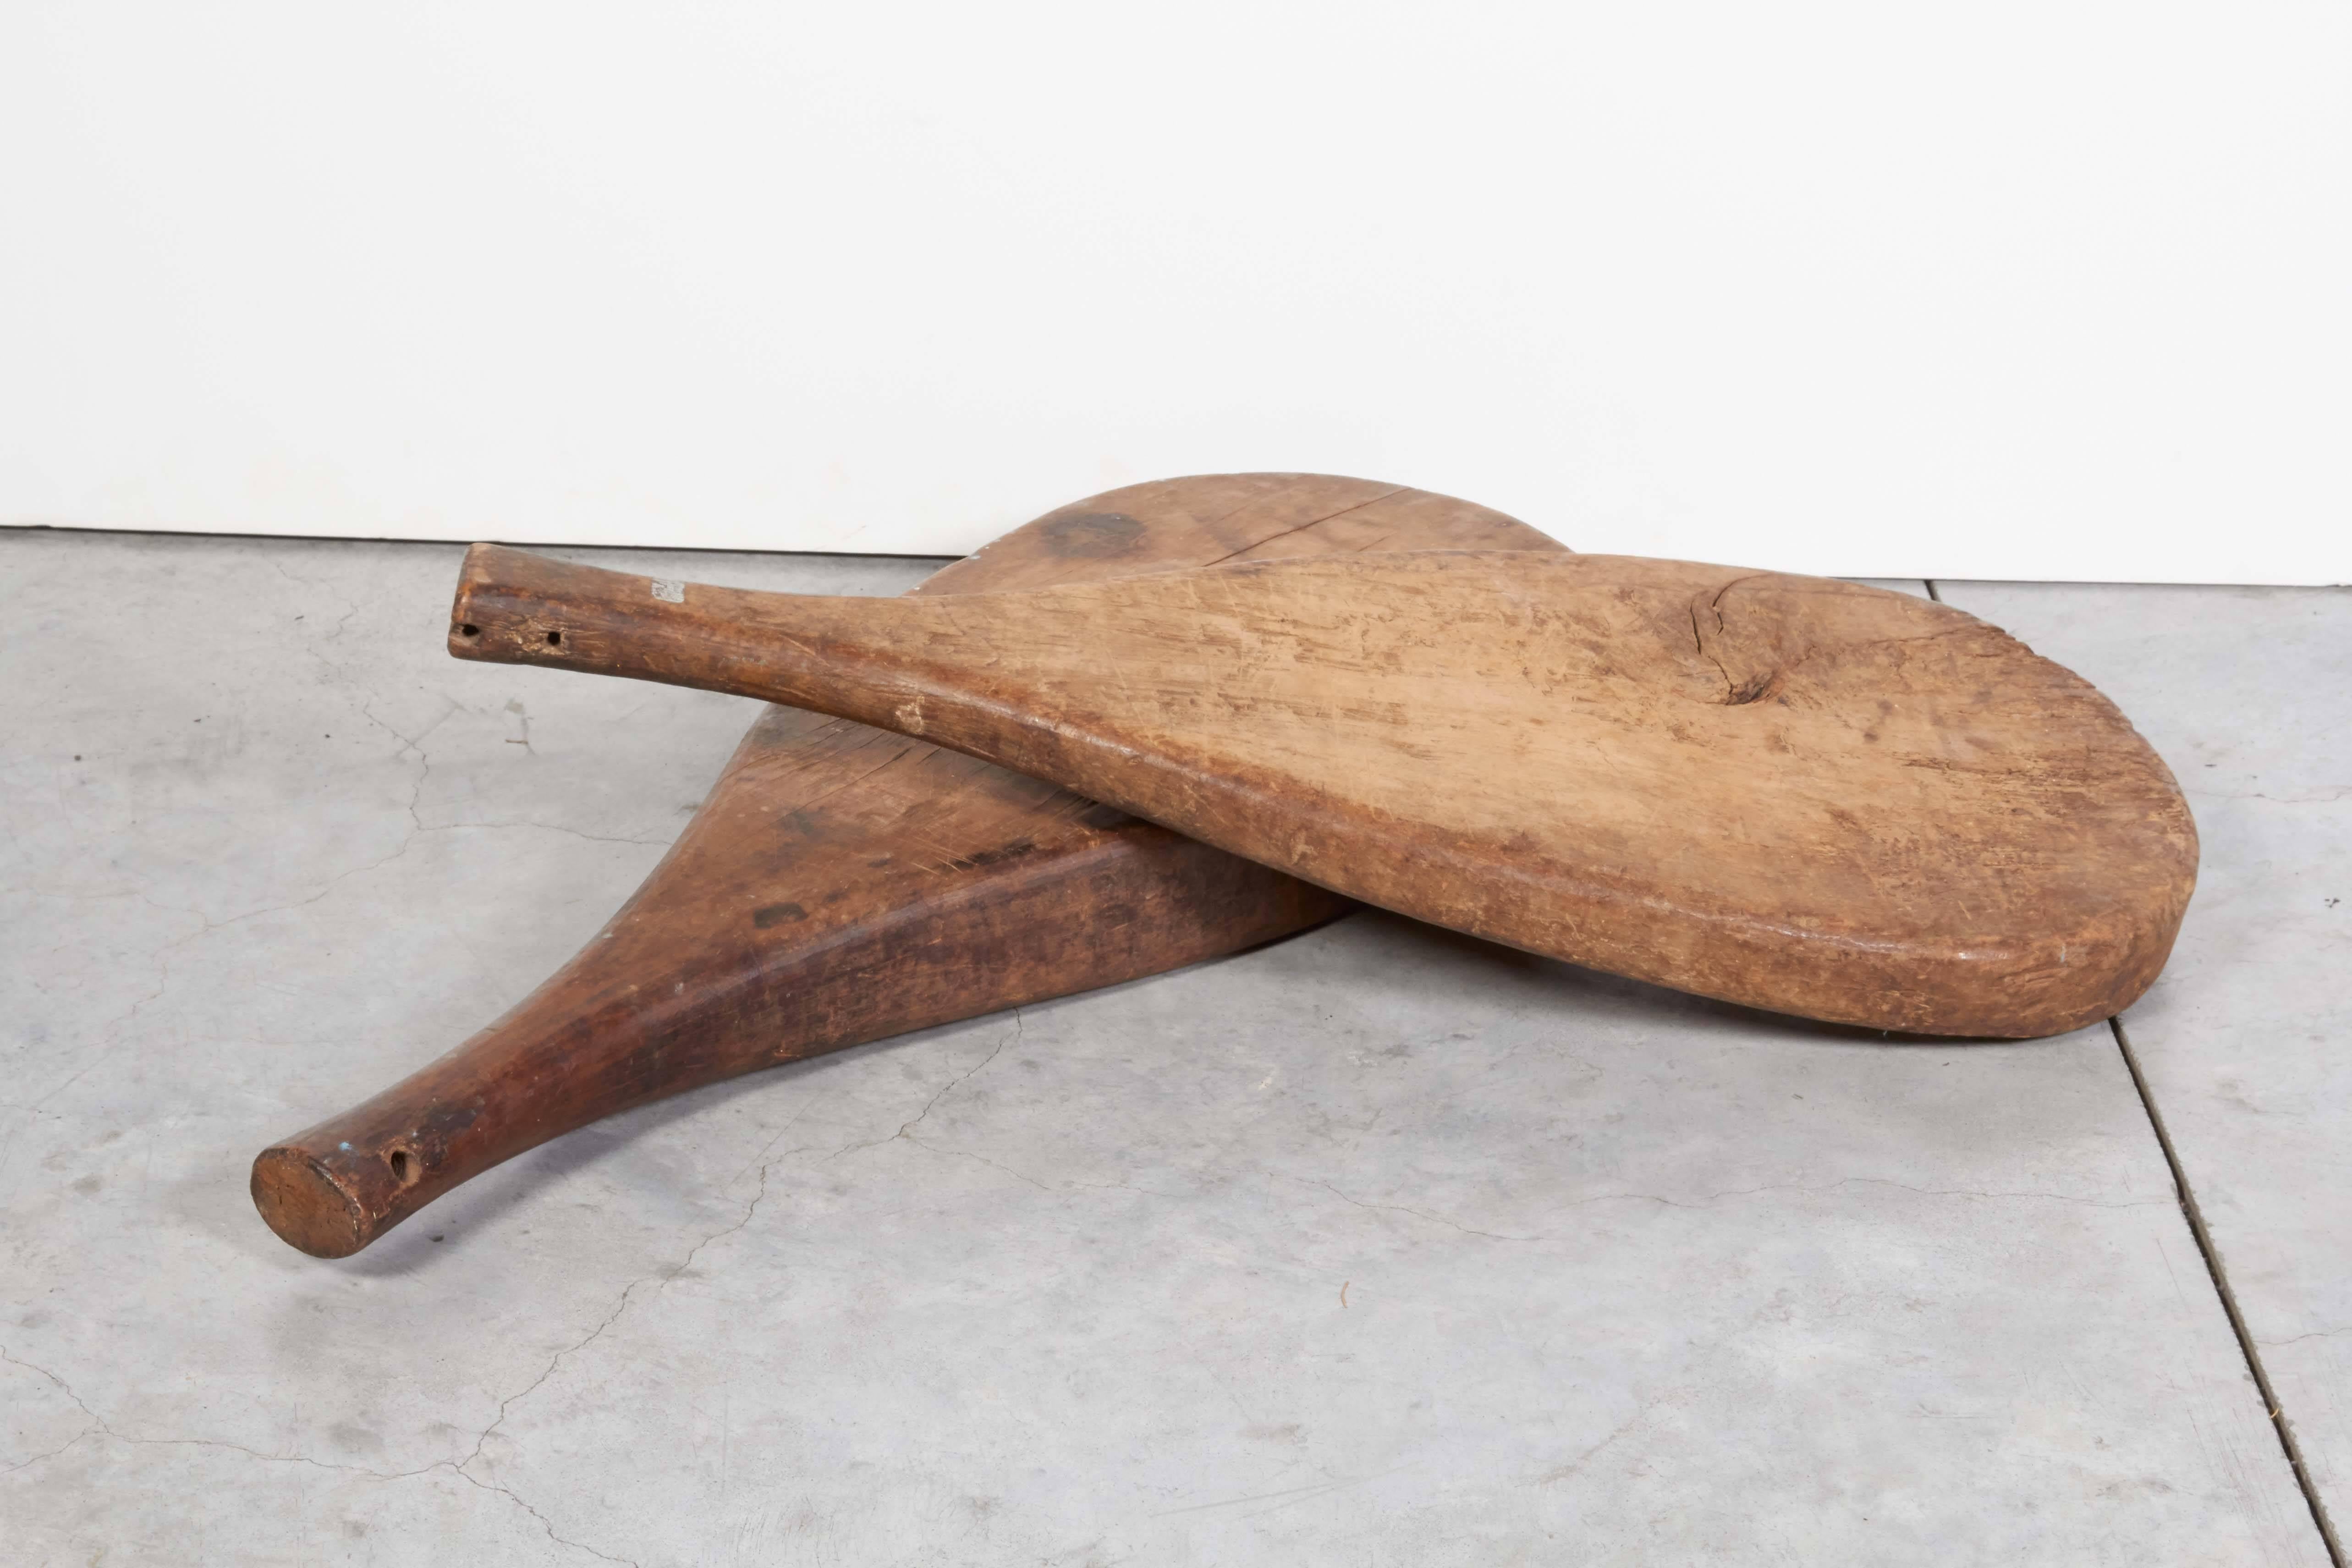 Wood Thick Rustic Paddle Shaped Trays